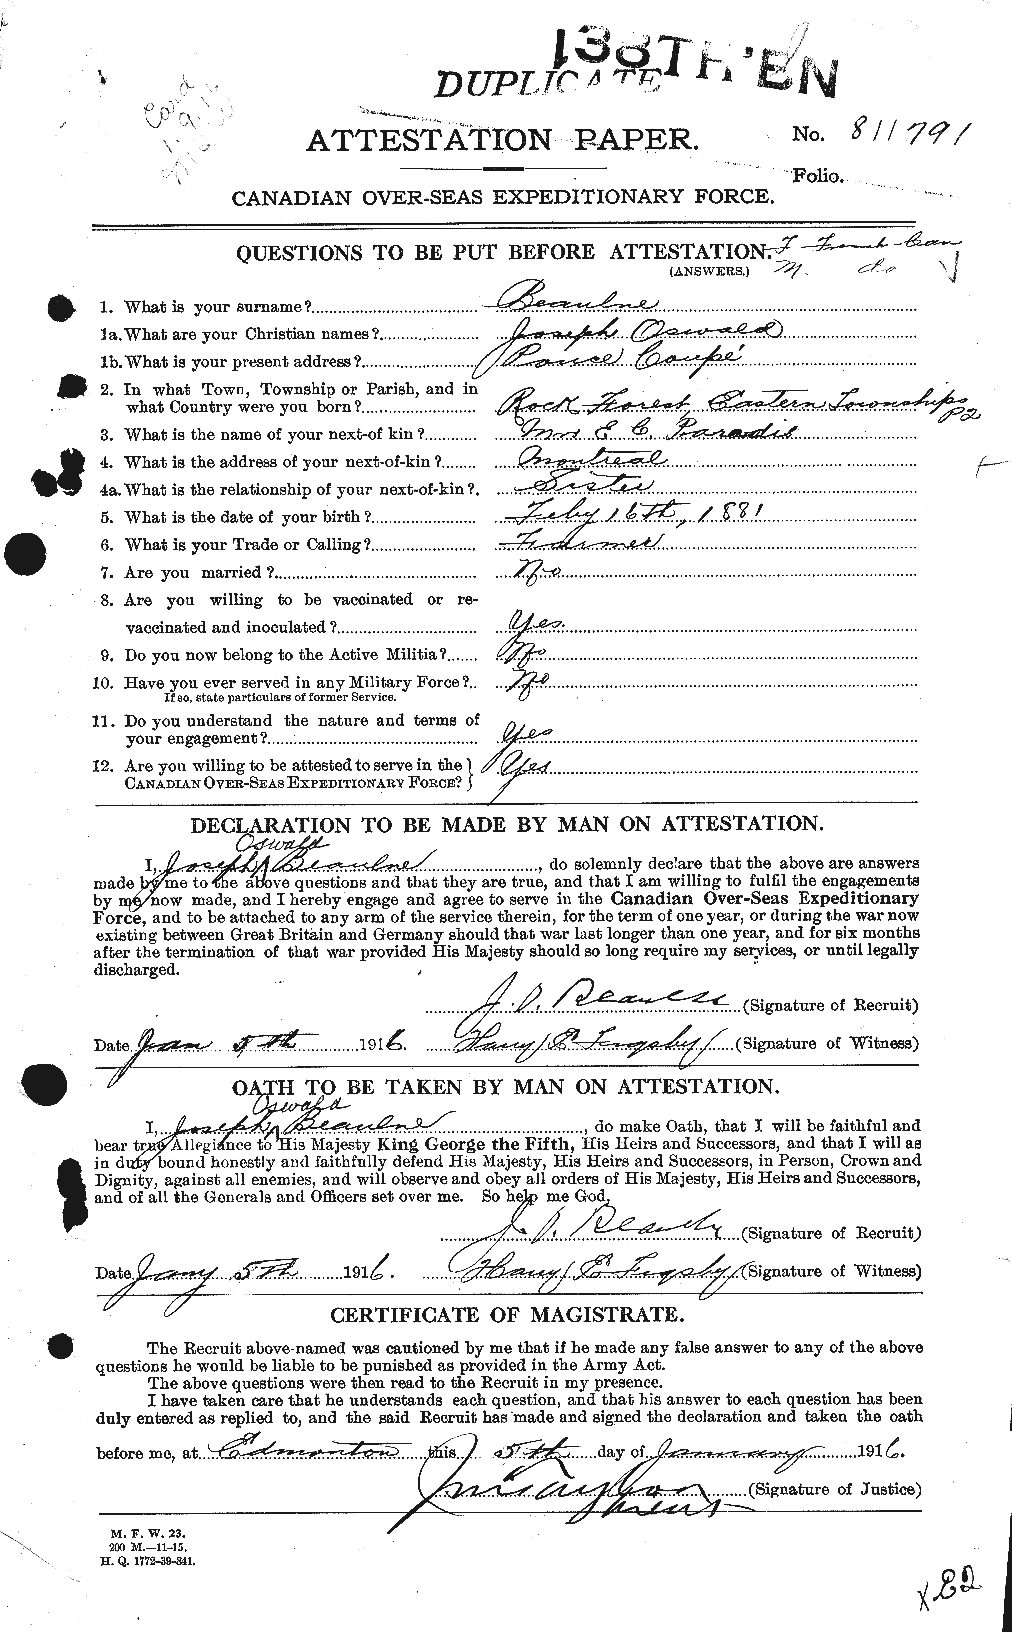 Personnel Records of the First World War - CEF 231622a